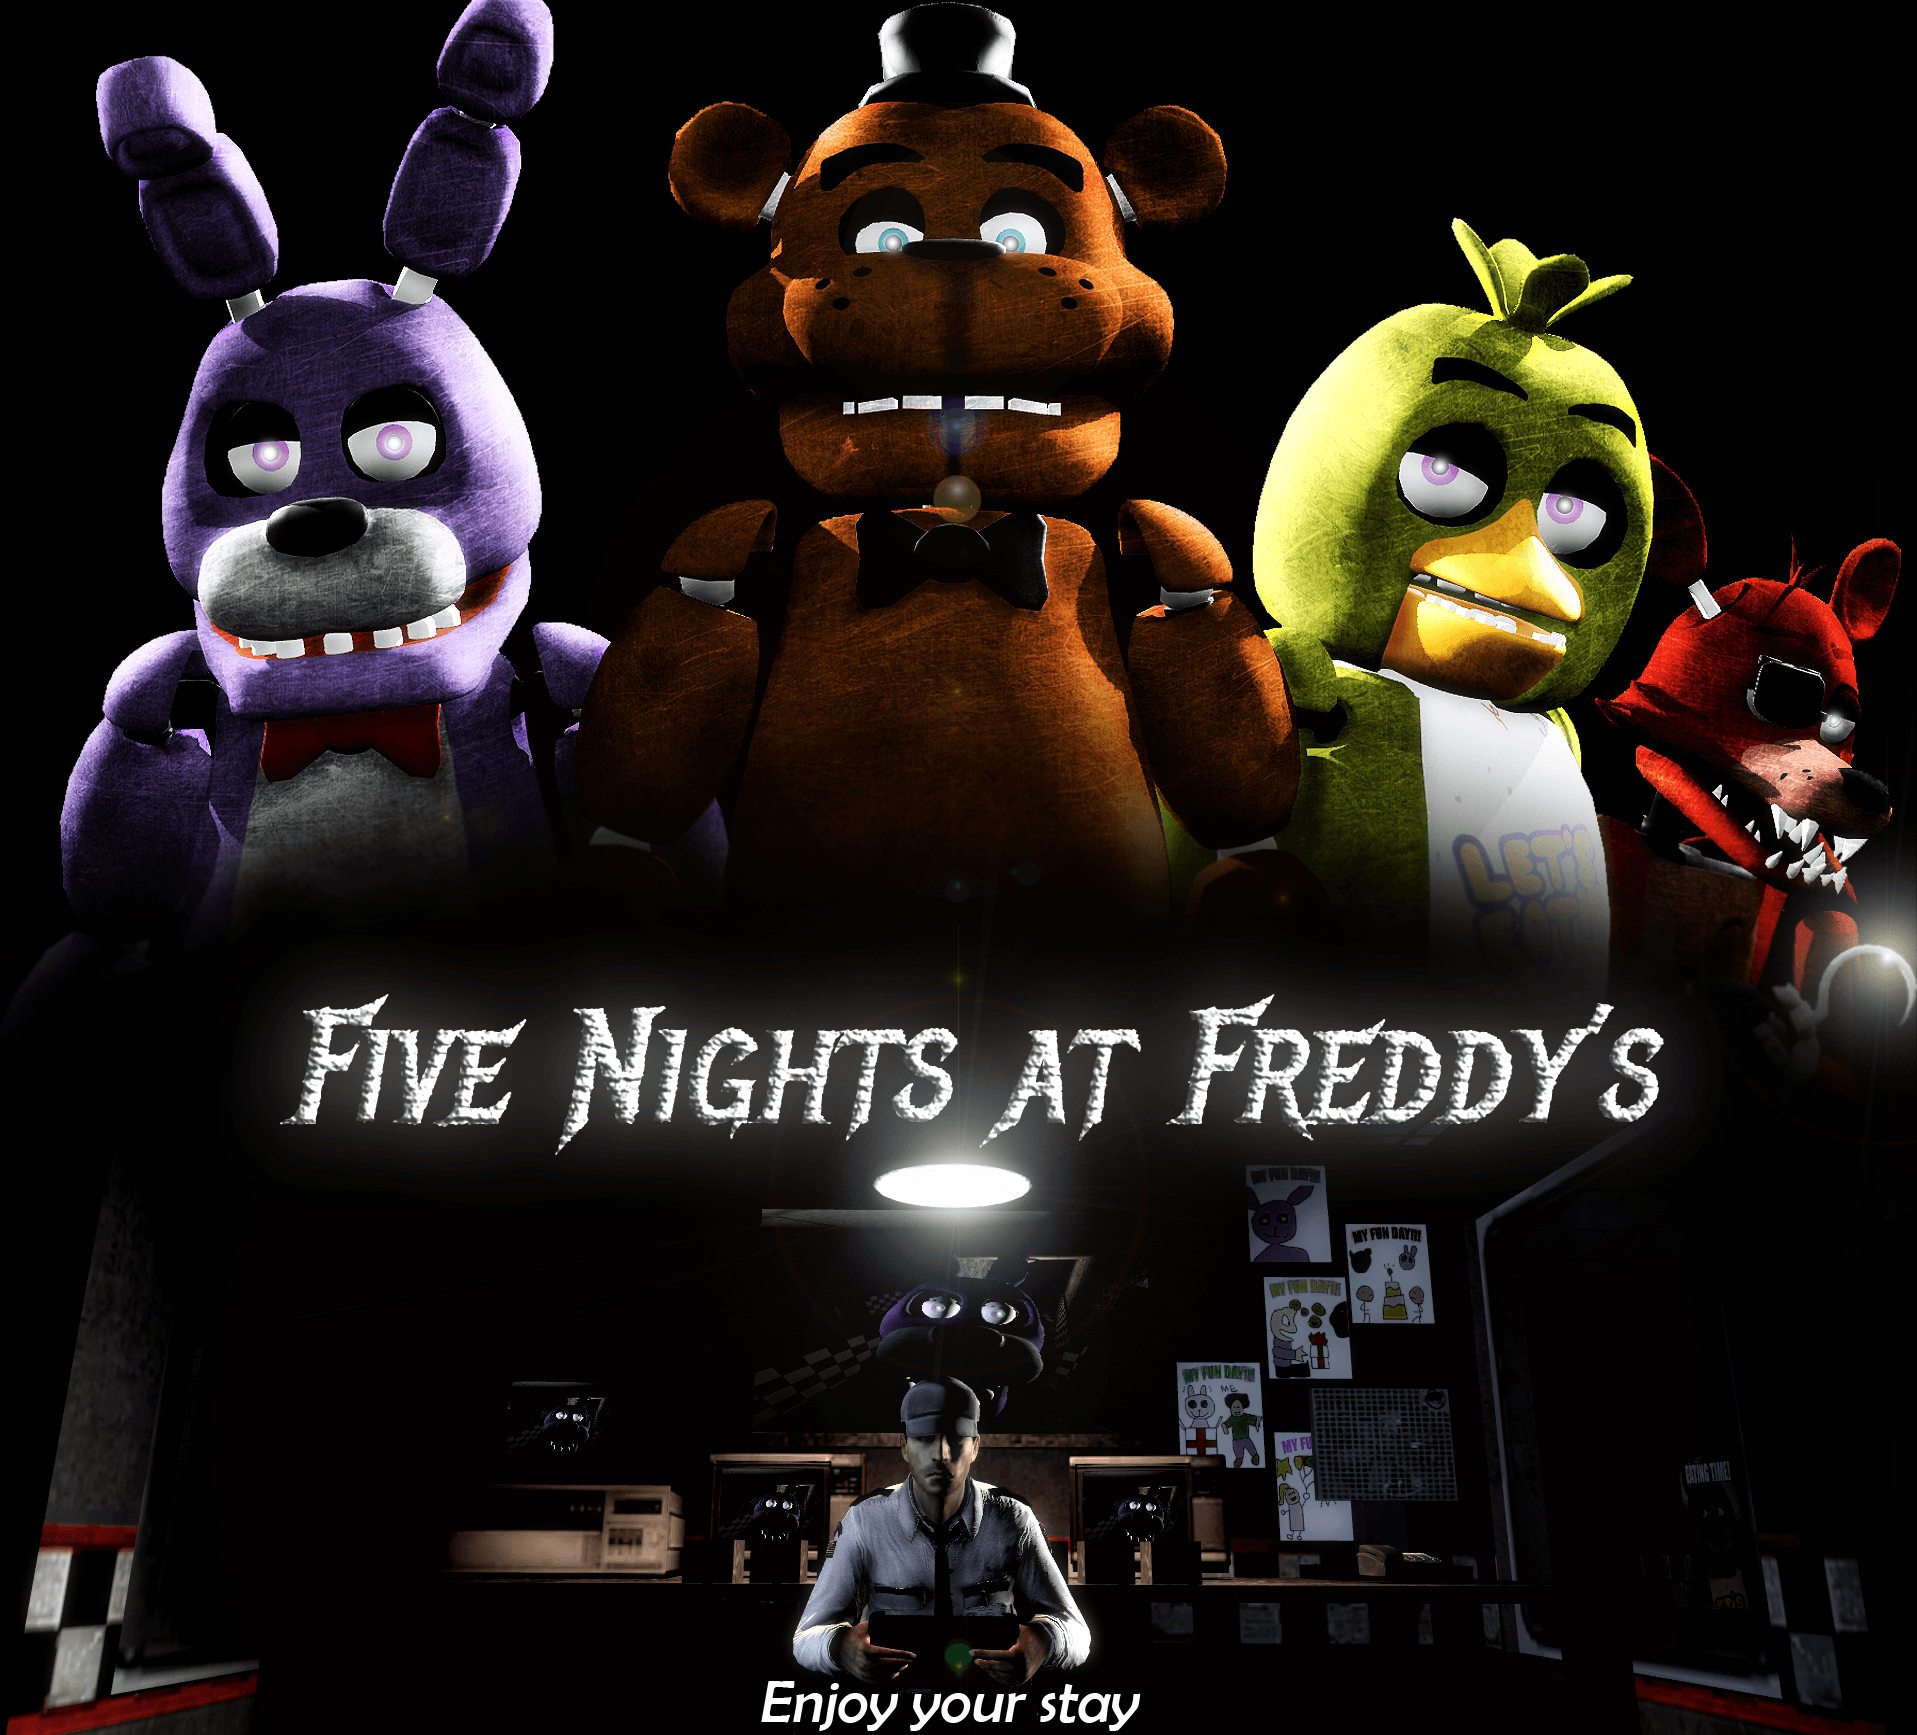 3840x2160px, free download, HD wallpaper: Five Nights at Freddy's, Five  Nights at Freddy's 3, Five Nights at Candy's